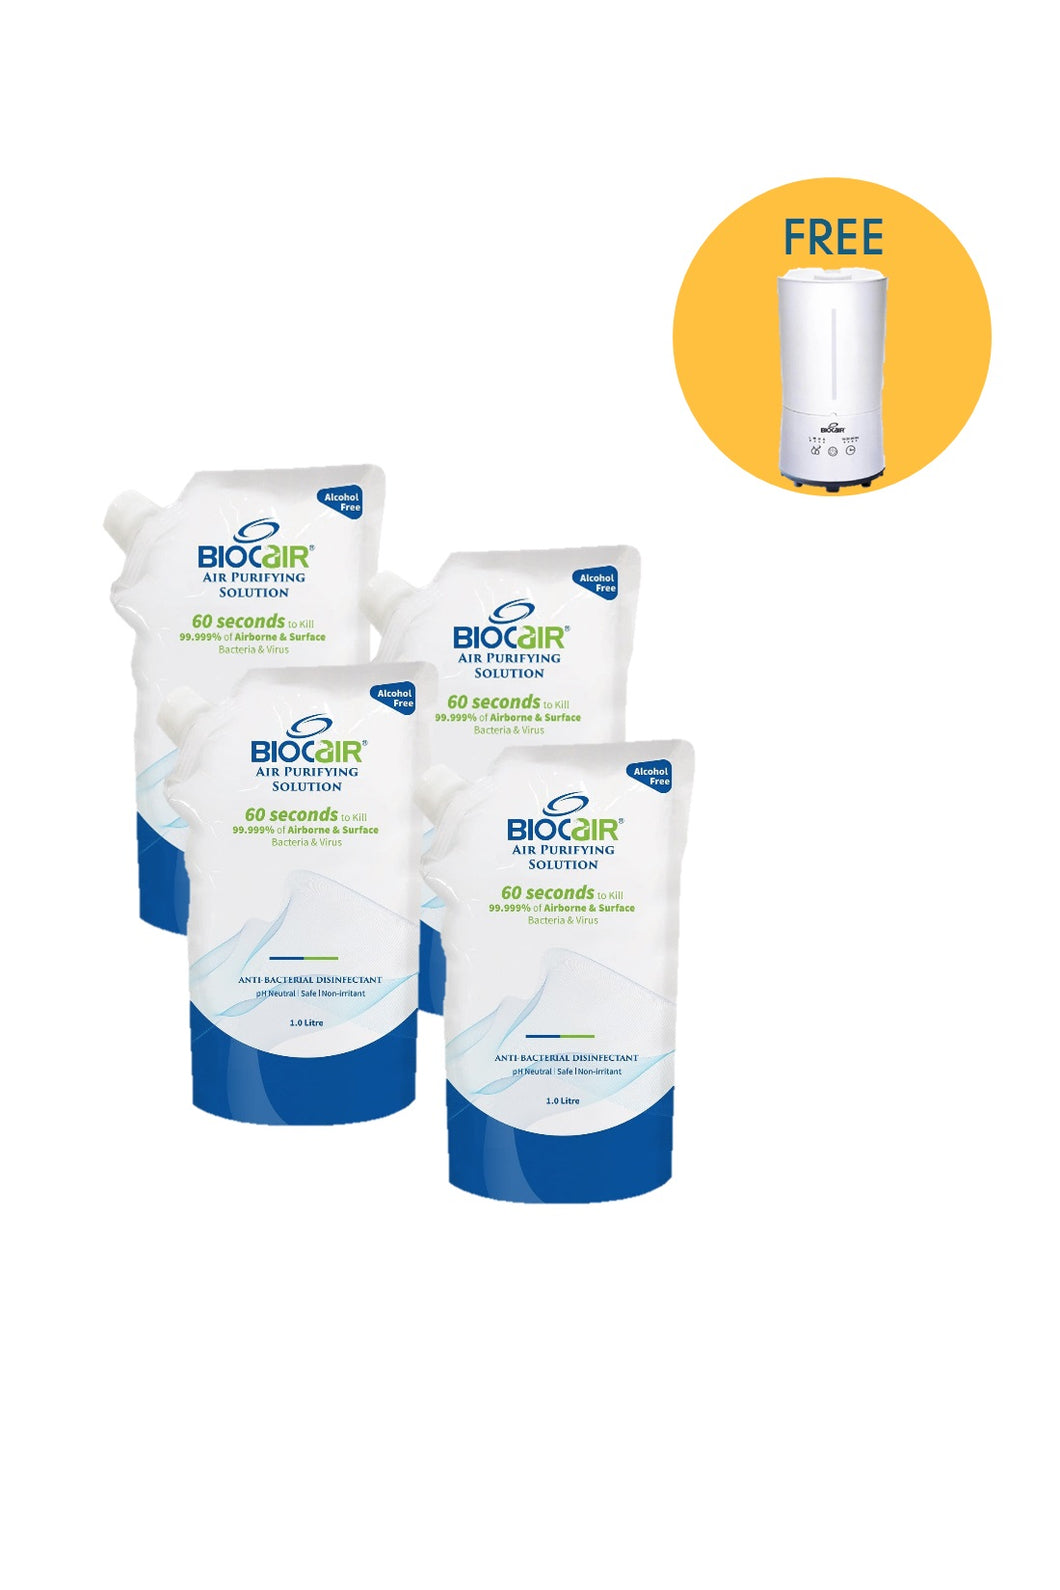 BioCair Air Purifying Solution - 4Pack (FREE CL200 Dry Mist Disinfection Machine)